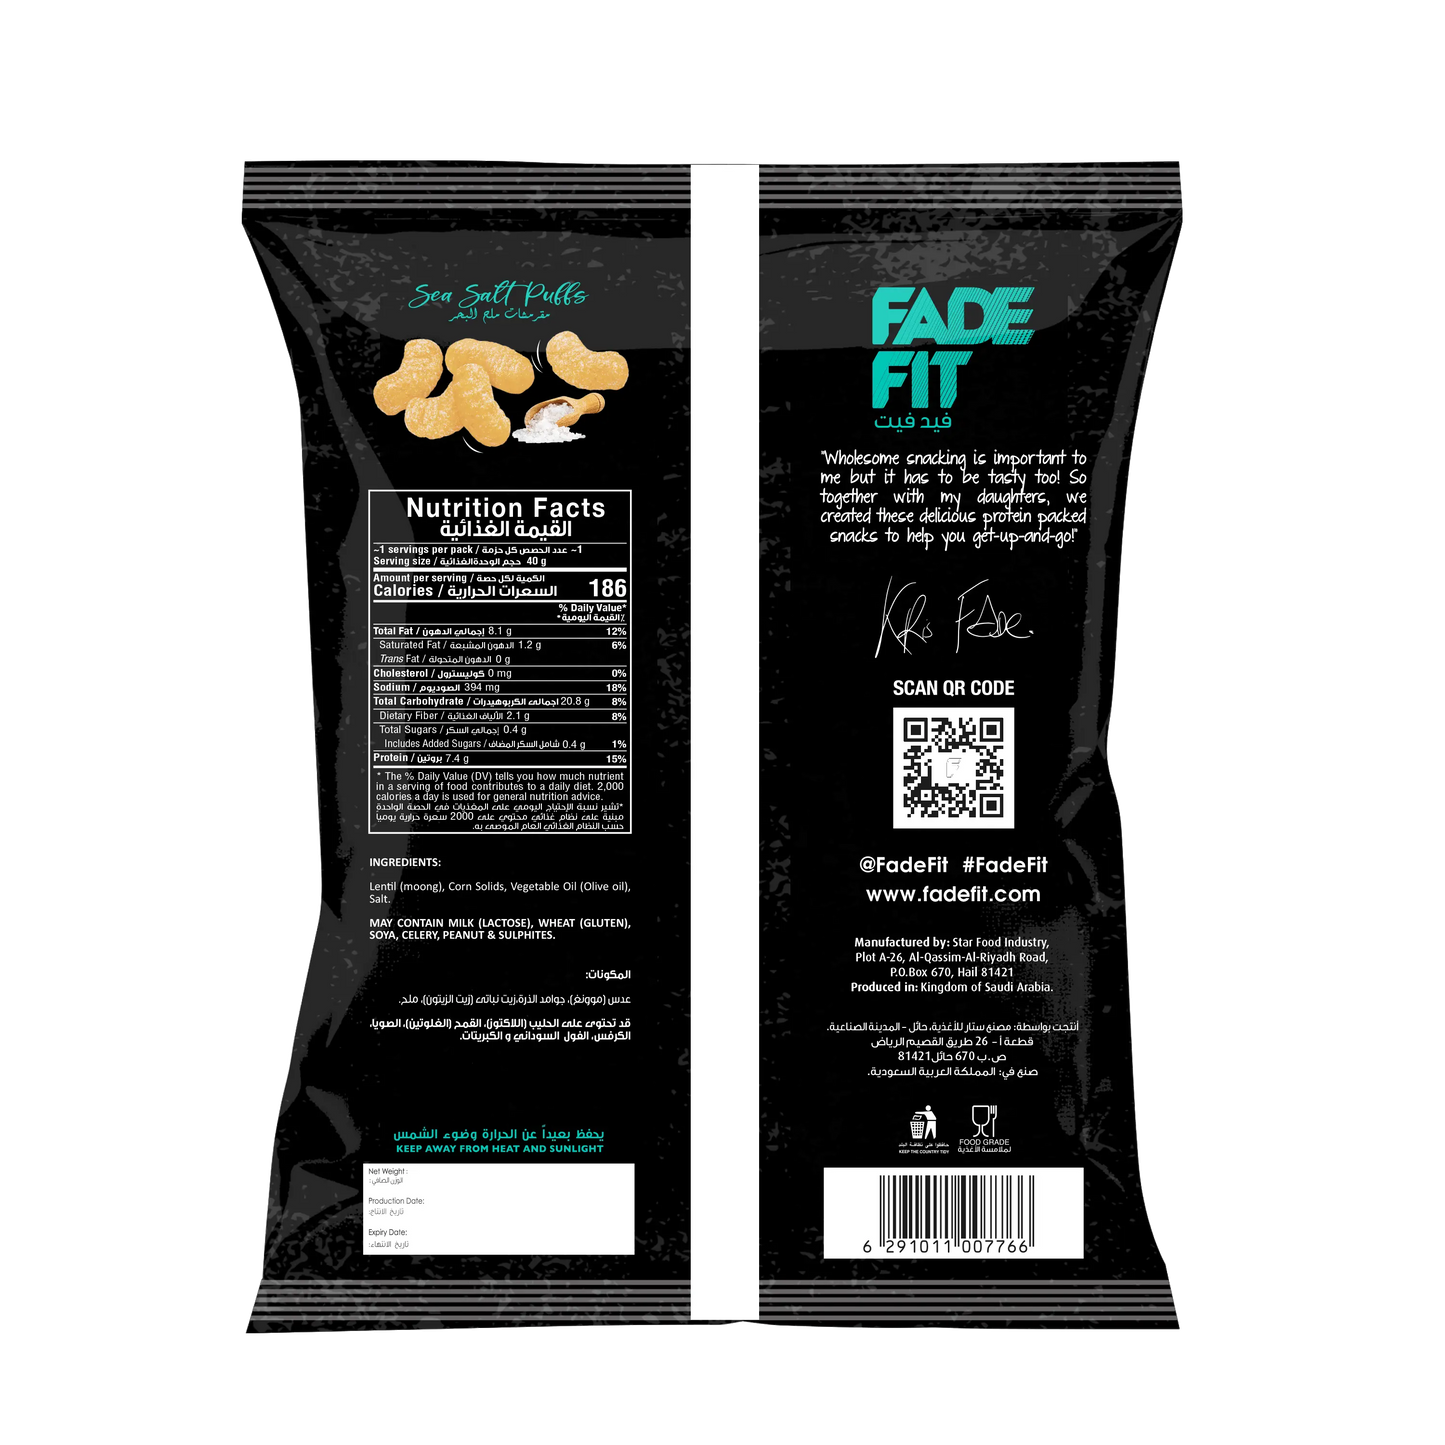 Fade Fit - Sea Salt Puffs, Rich in Protein, Baked, NON GMO 40gm Fade Fit